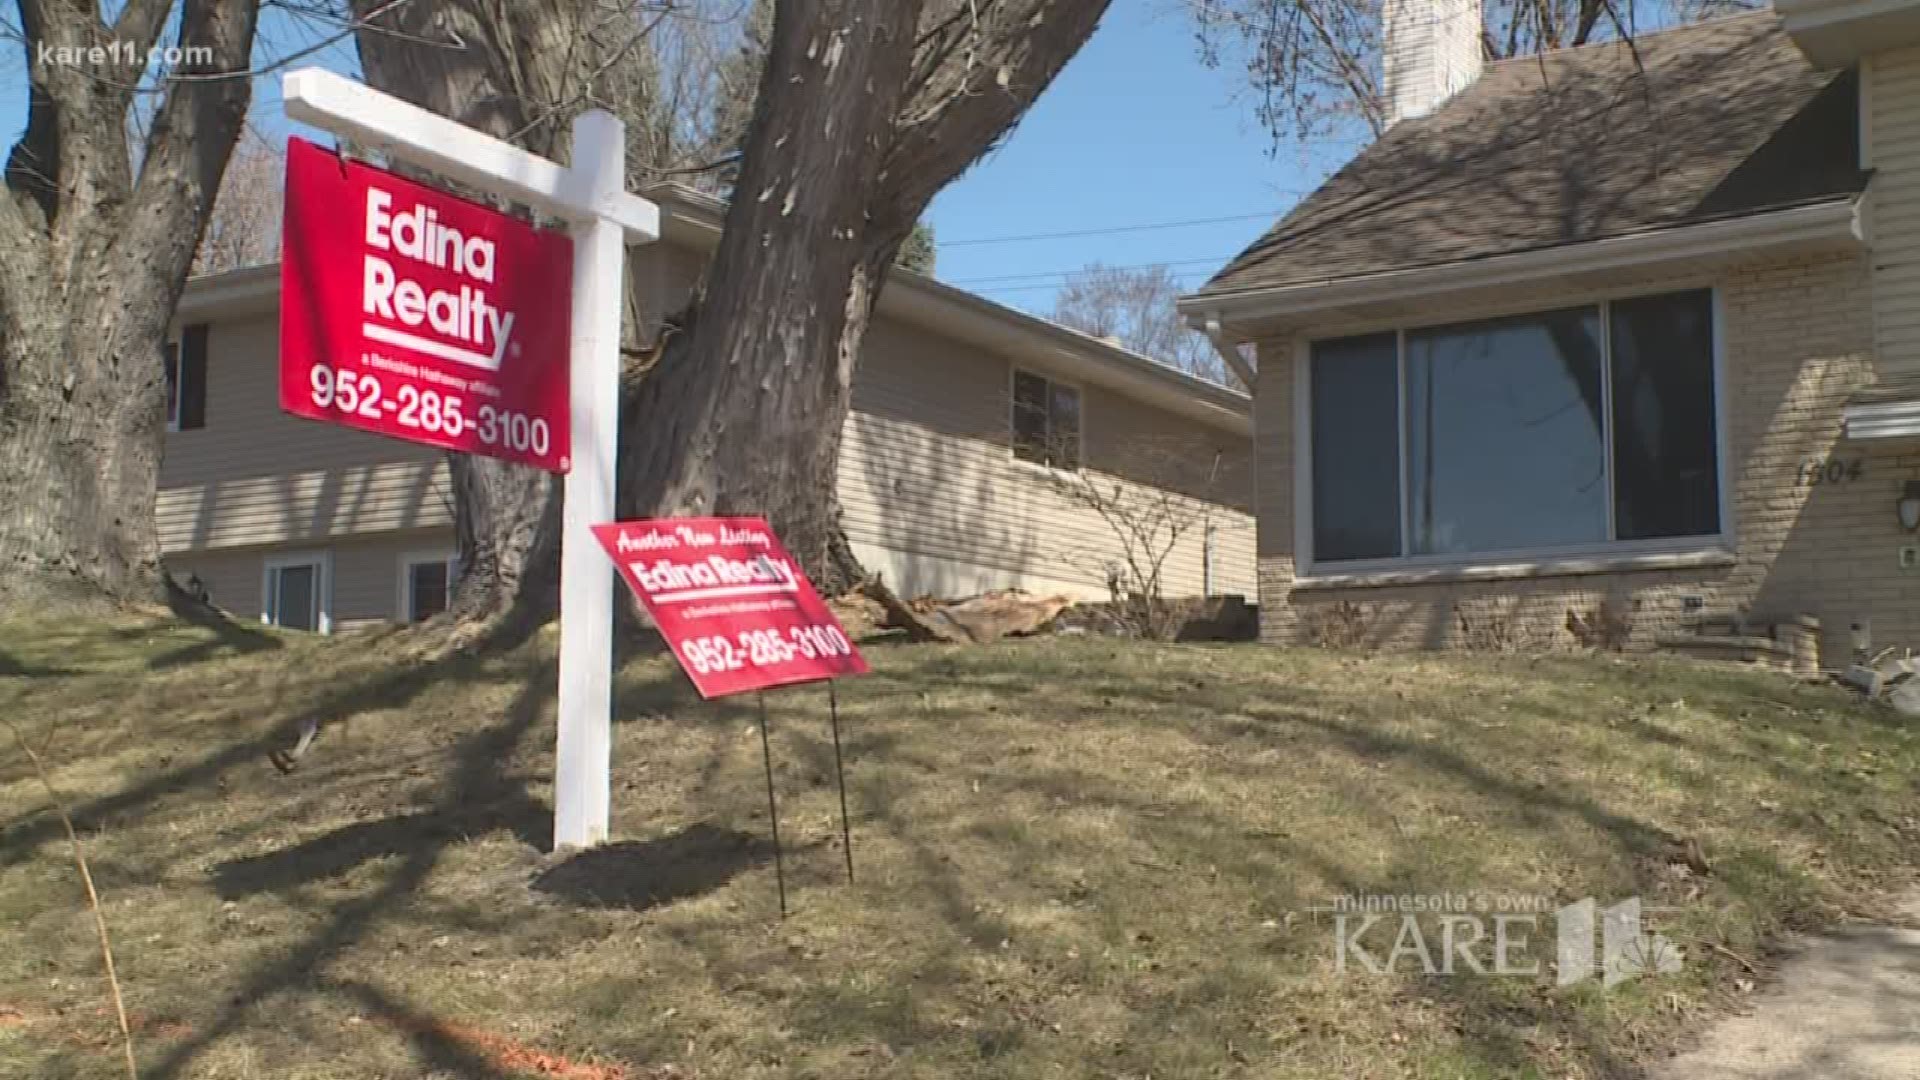 Spring real estate market: it's a sellers' market for homes in highest demand